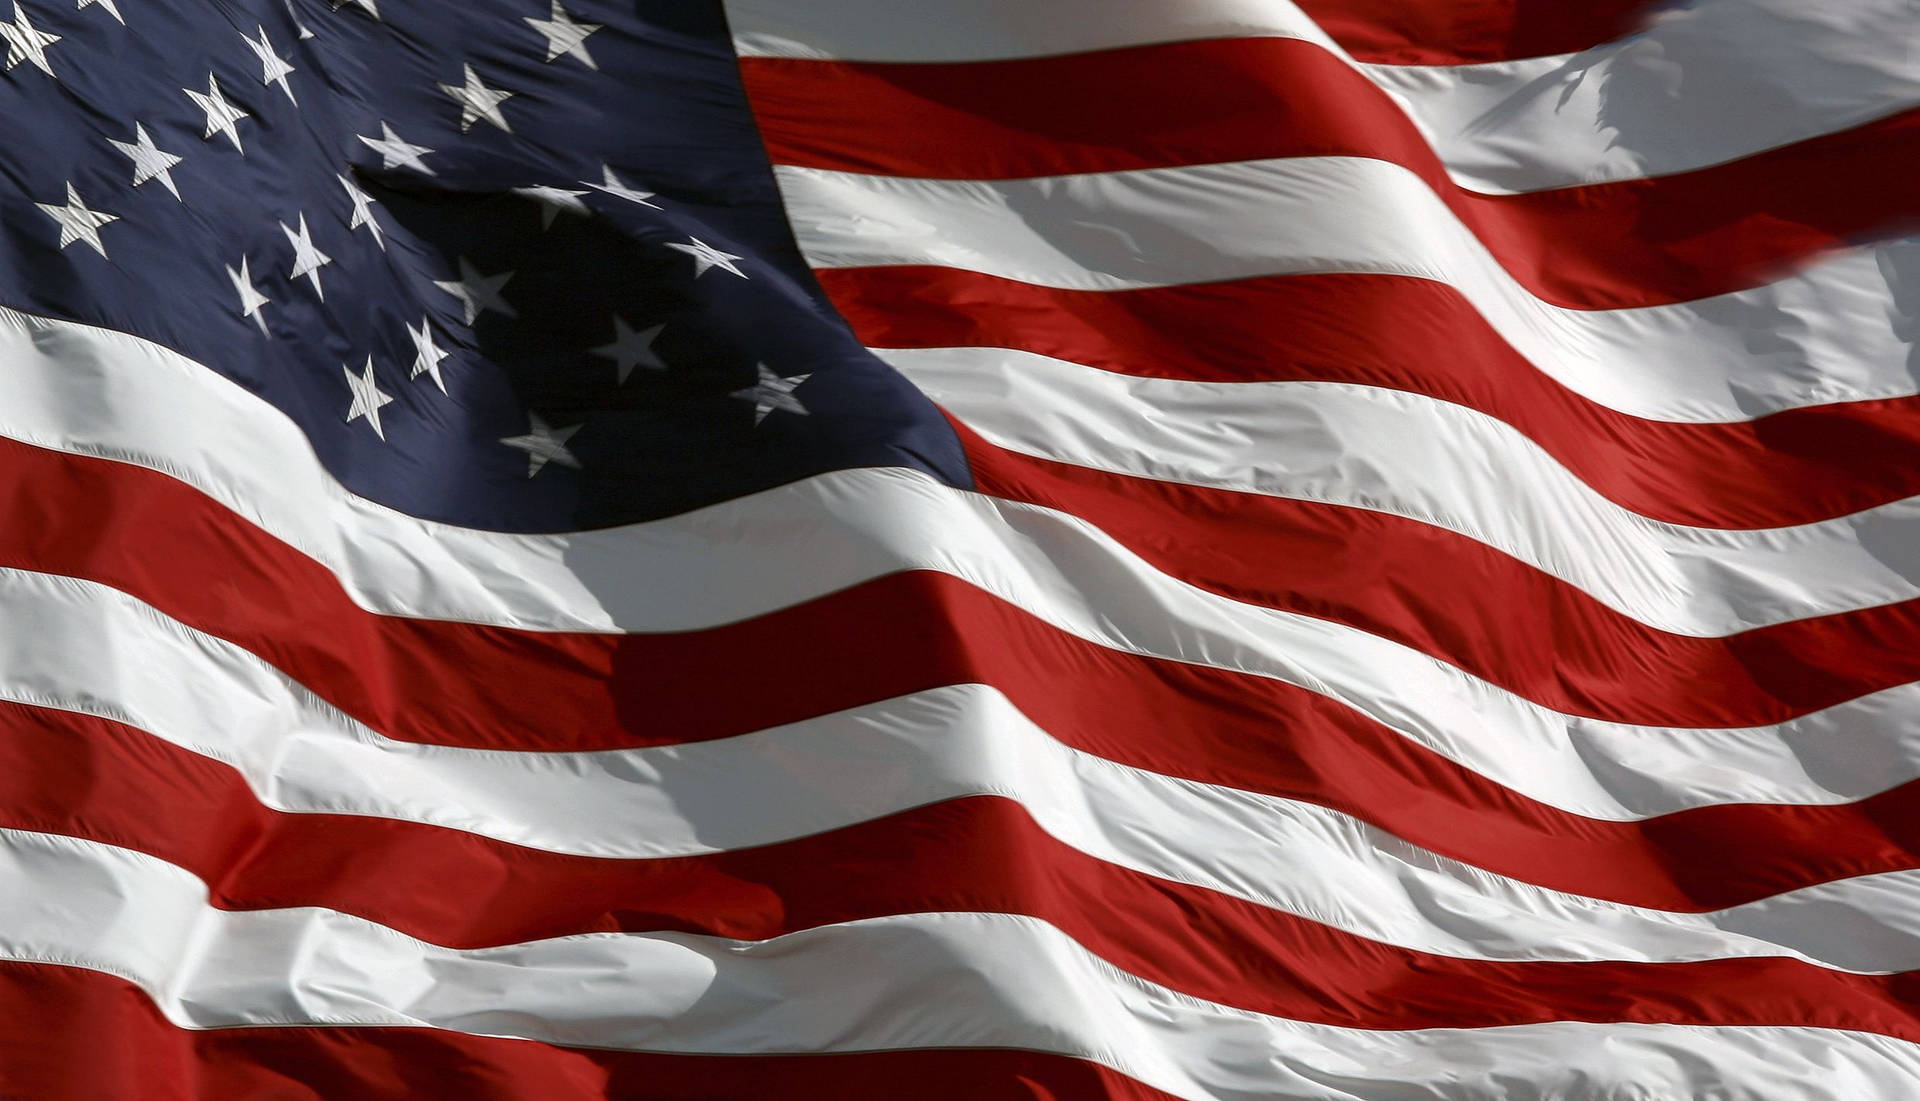 Patriotic 2478X1421 Wallpaper and Background Image